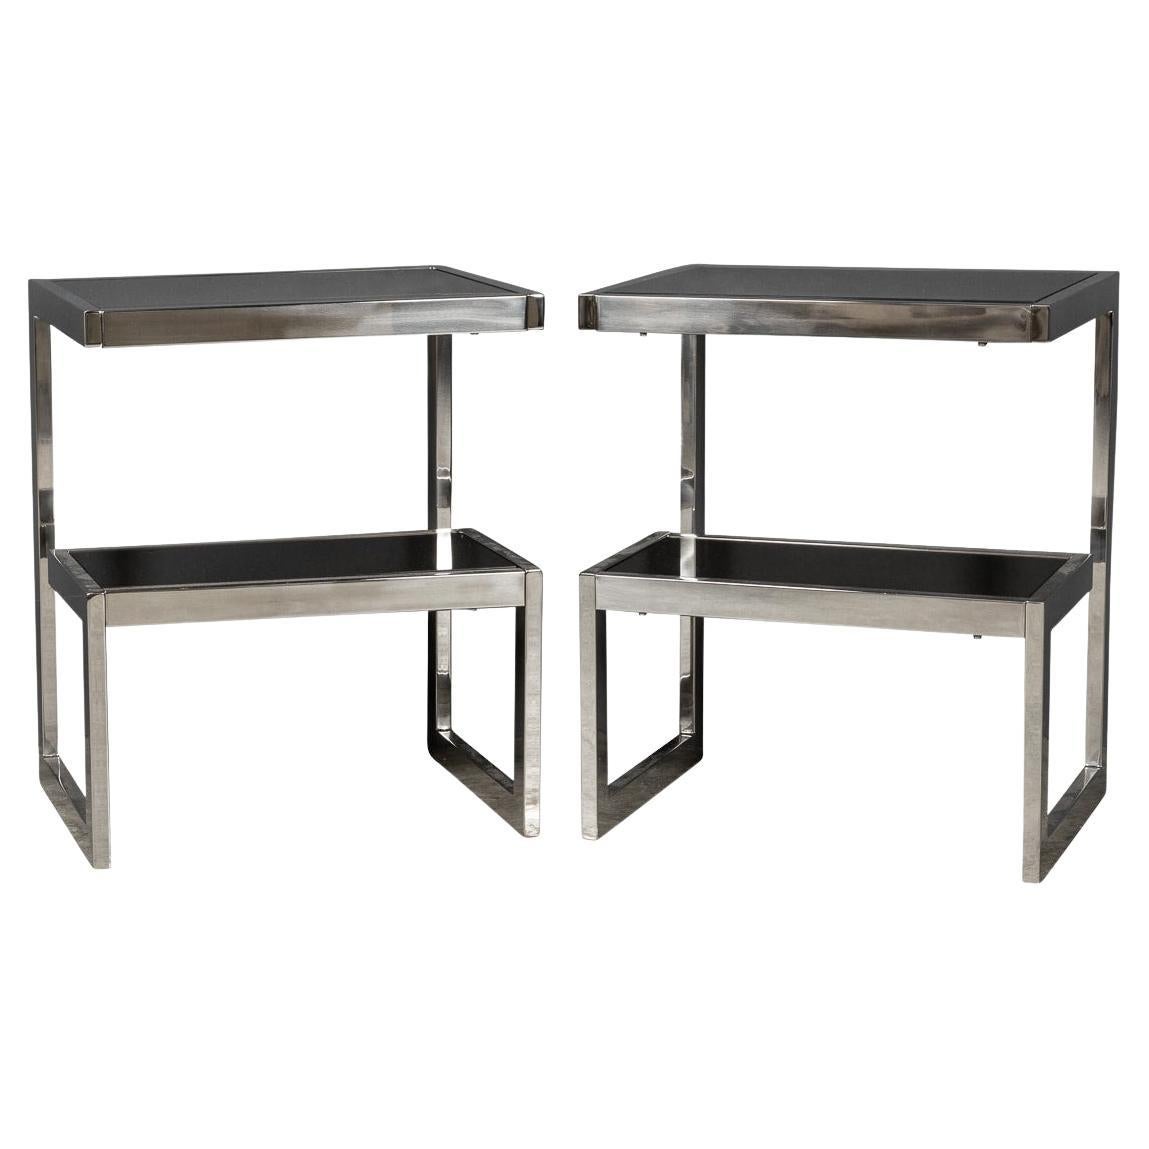 20th Century Pair of Chrome & Glass G Tables by Belgo, c.1970